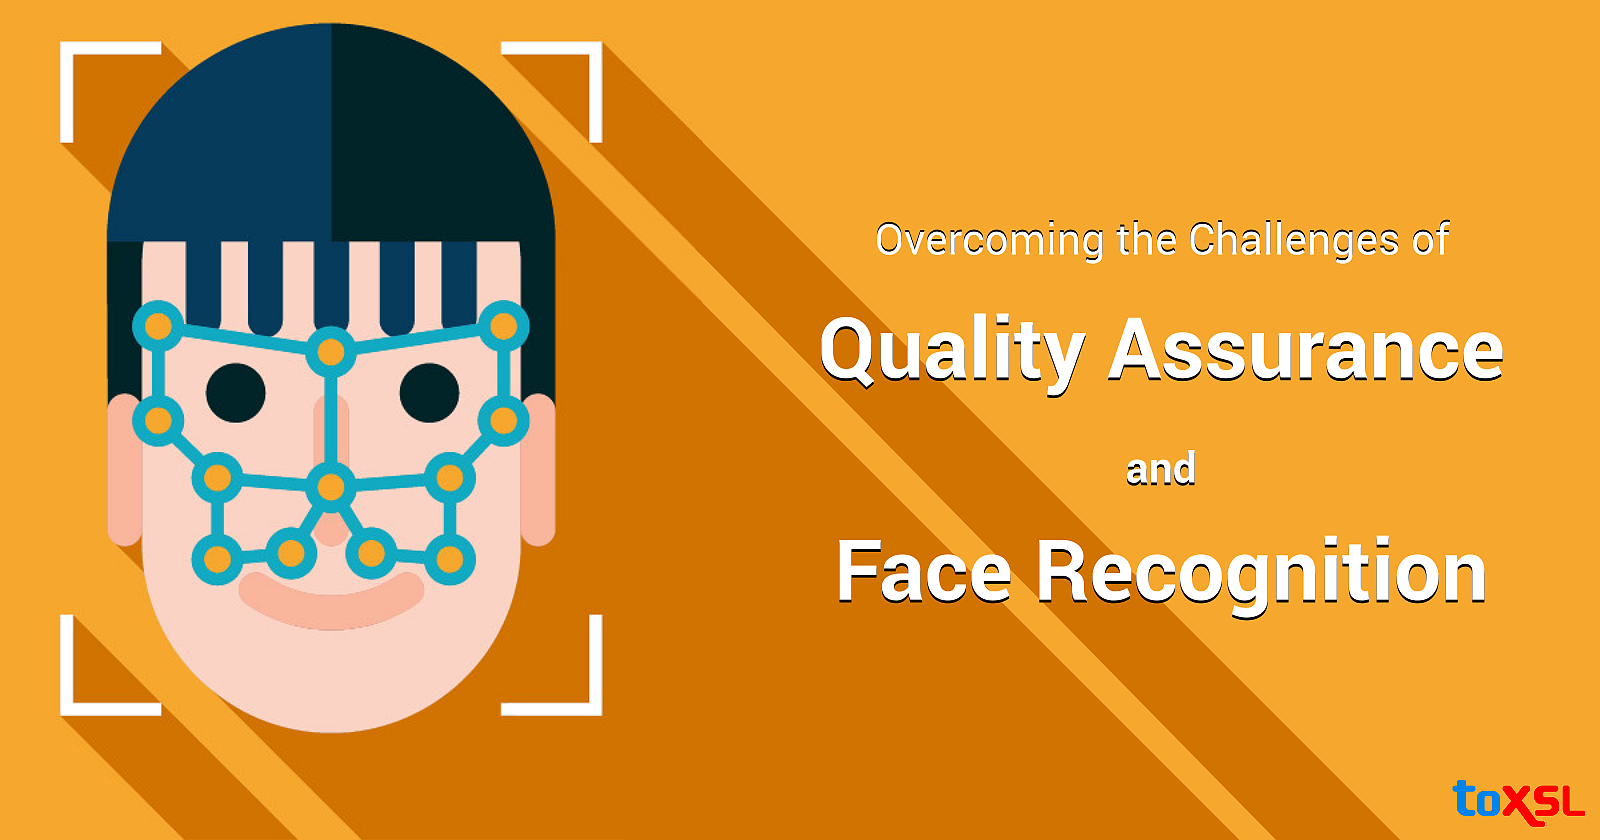 Quality Assurance and Face Recognition: Overcoming the Challenges Together